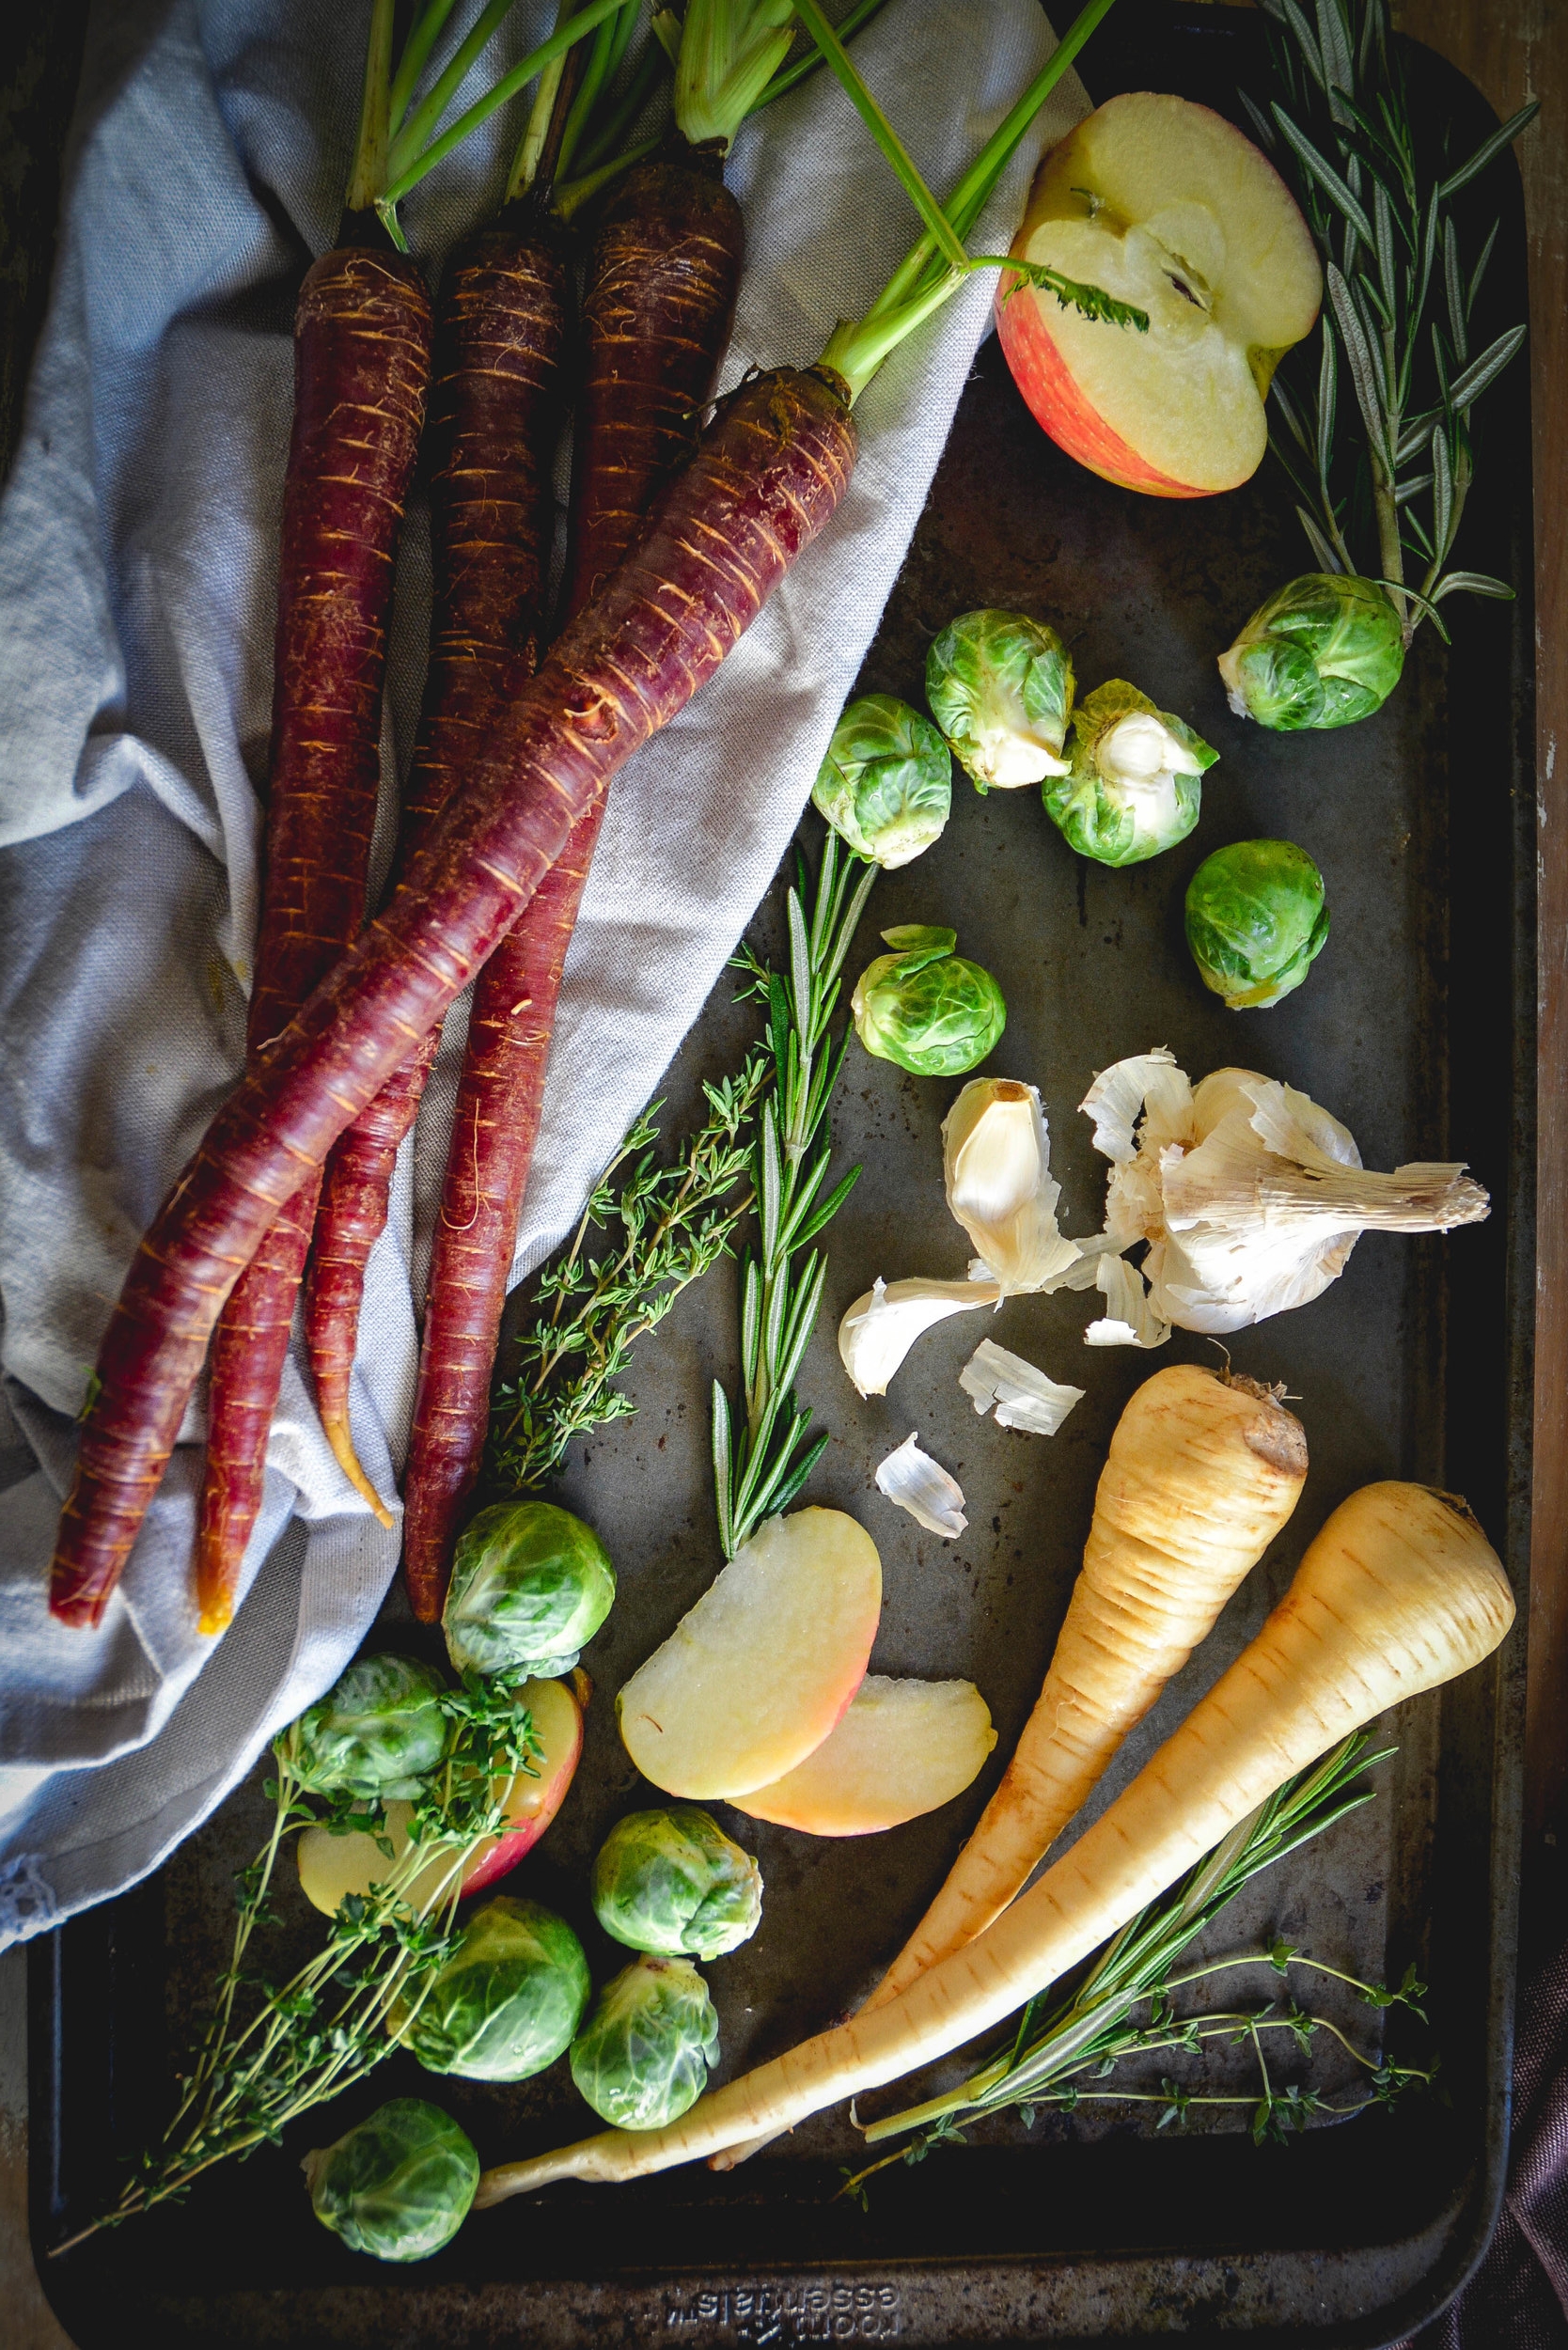 carrots, brussels sprouts, apple, parsnip on tray with herbs and napkin